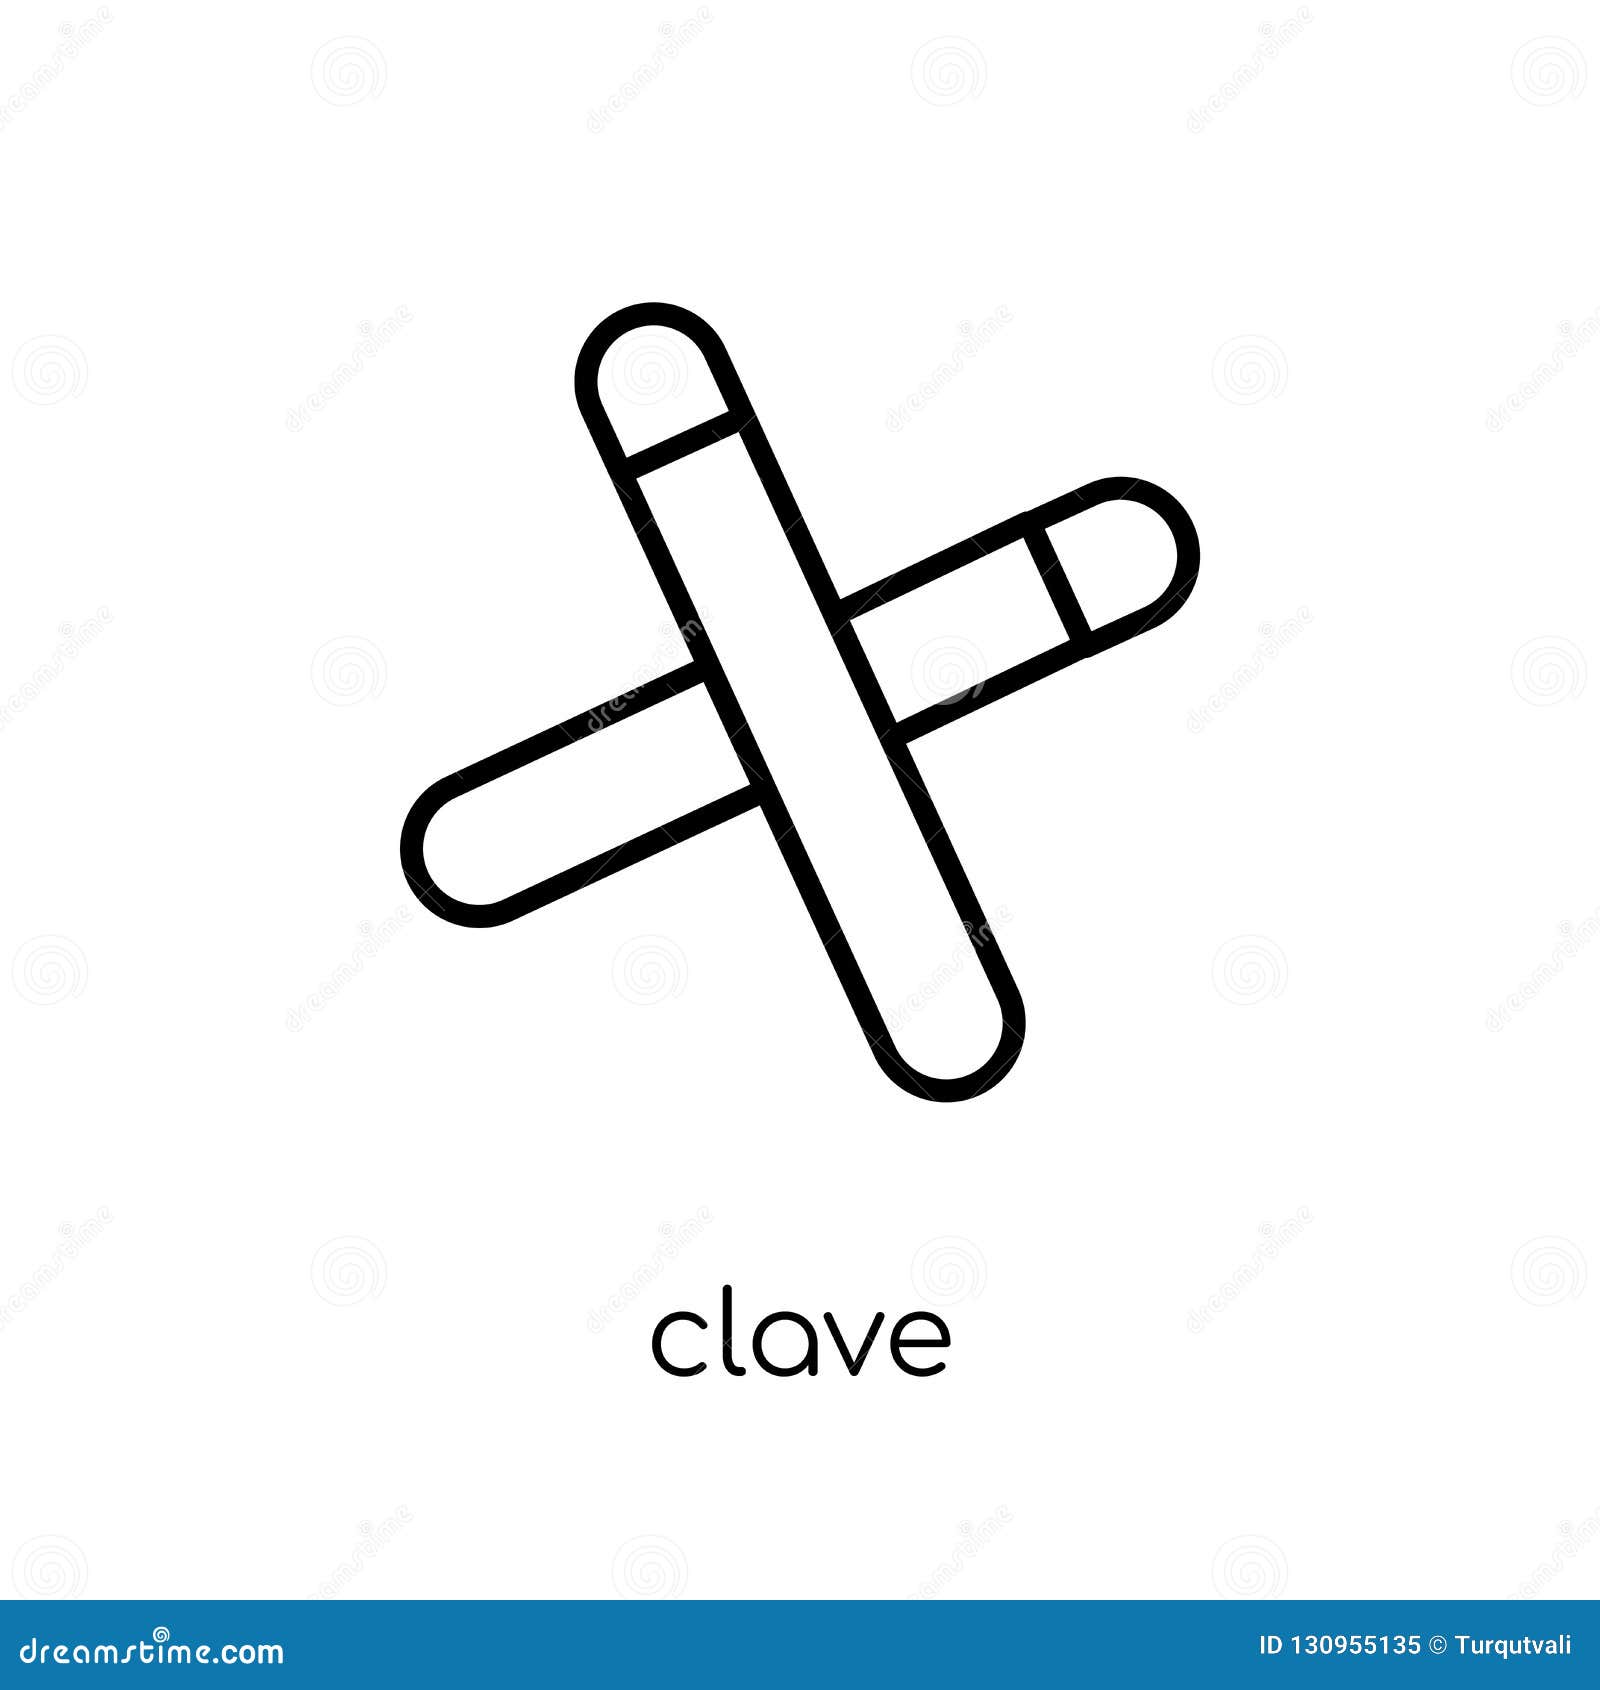 clave icon from music collection.